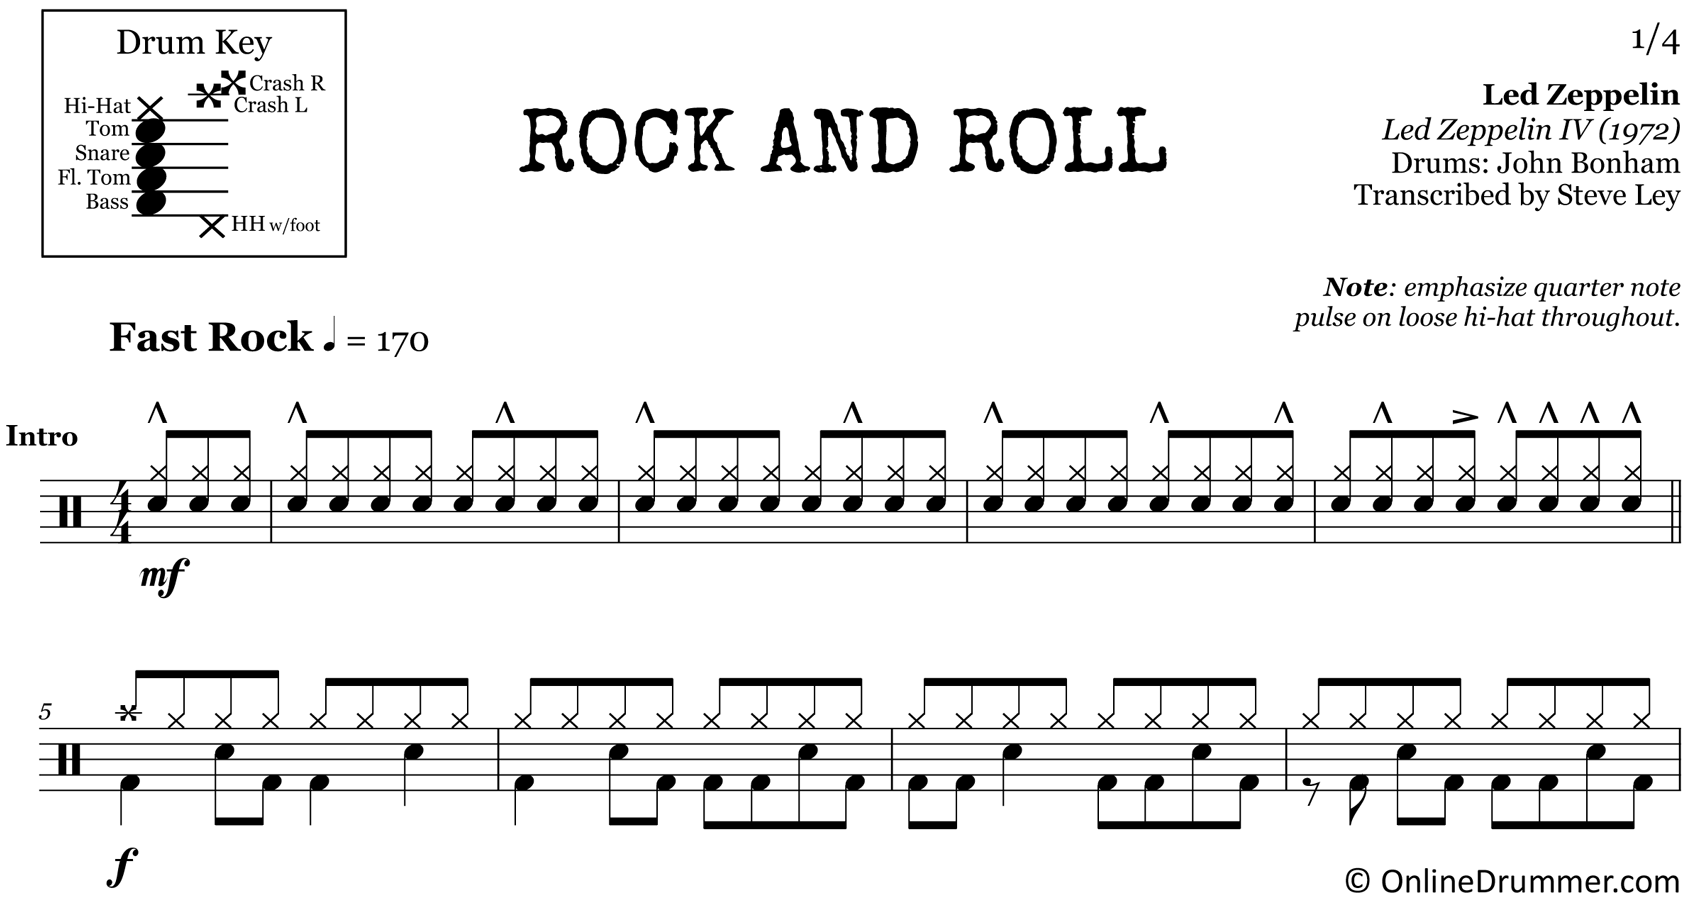 Rock and Roll - Led Zeppelin - Drum Sheet Music